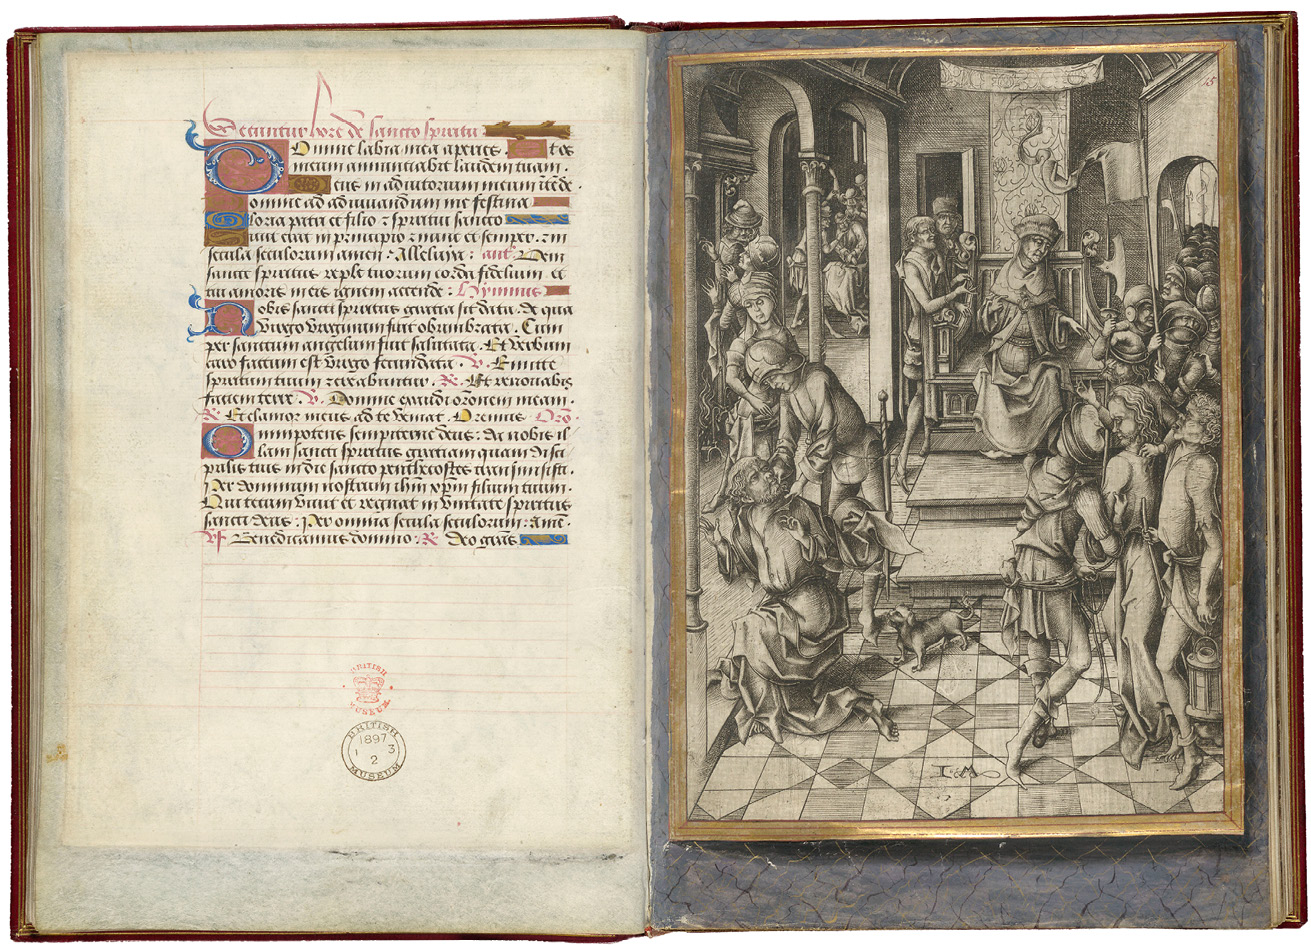 Fig. 136  Opening in a book of hours, featuring a mounted engraving by Israhel van Meckenem depicting Christ before Annas. London, British Museum, Department of Prints & Drawings, inv. 1897,0103.3, also known as London, British Library, Sloane Ms. 3981, fols 14v-15r.